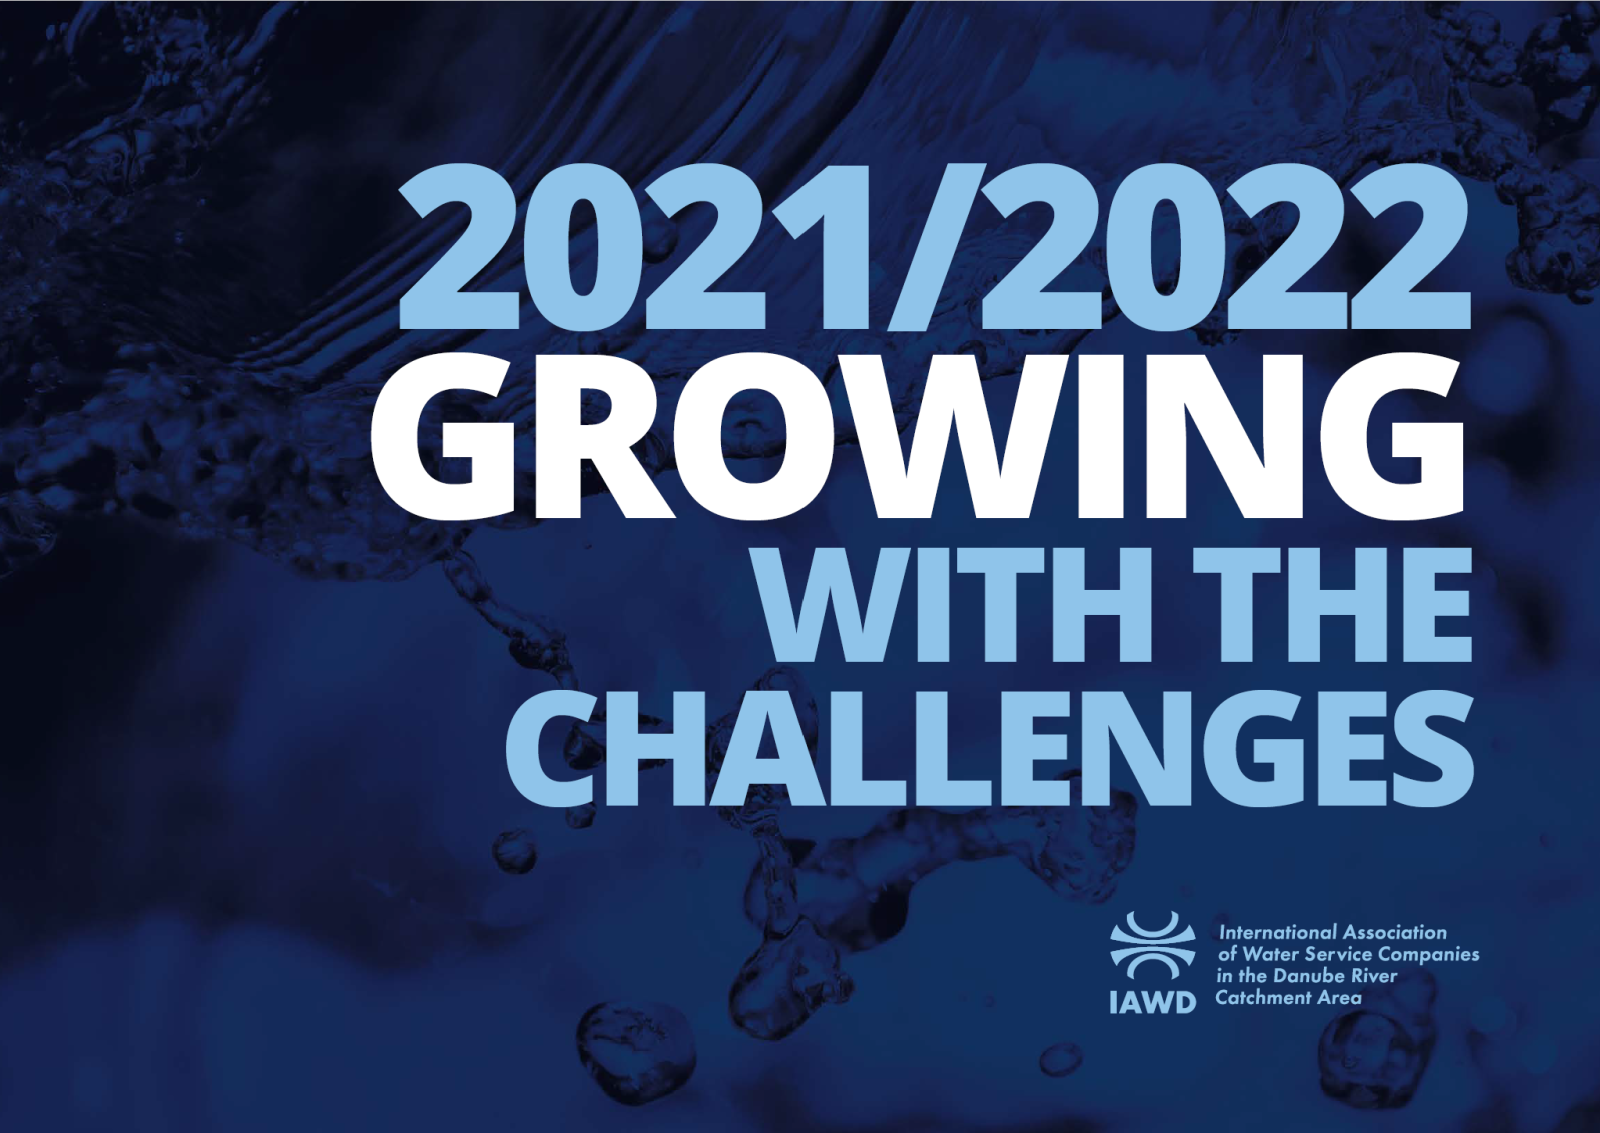 2021/2022 - Growing with the Challenges